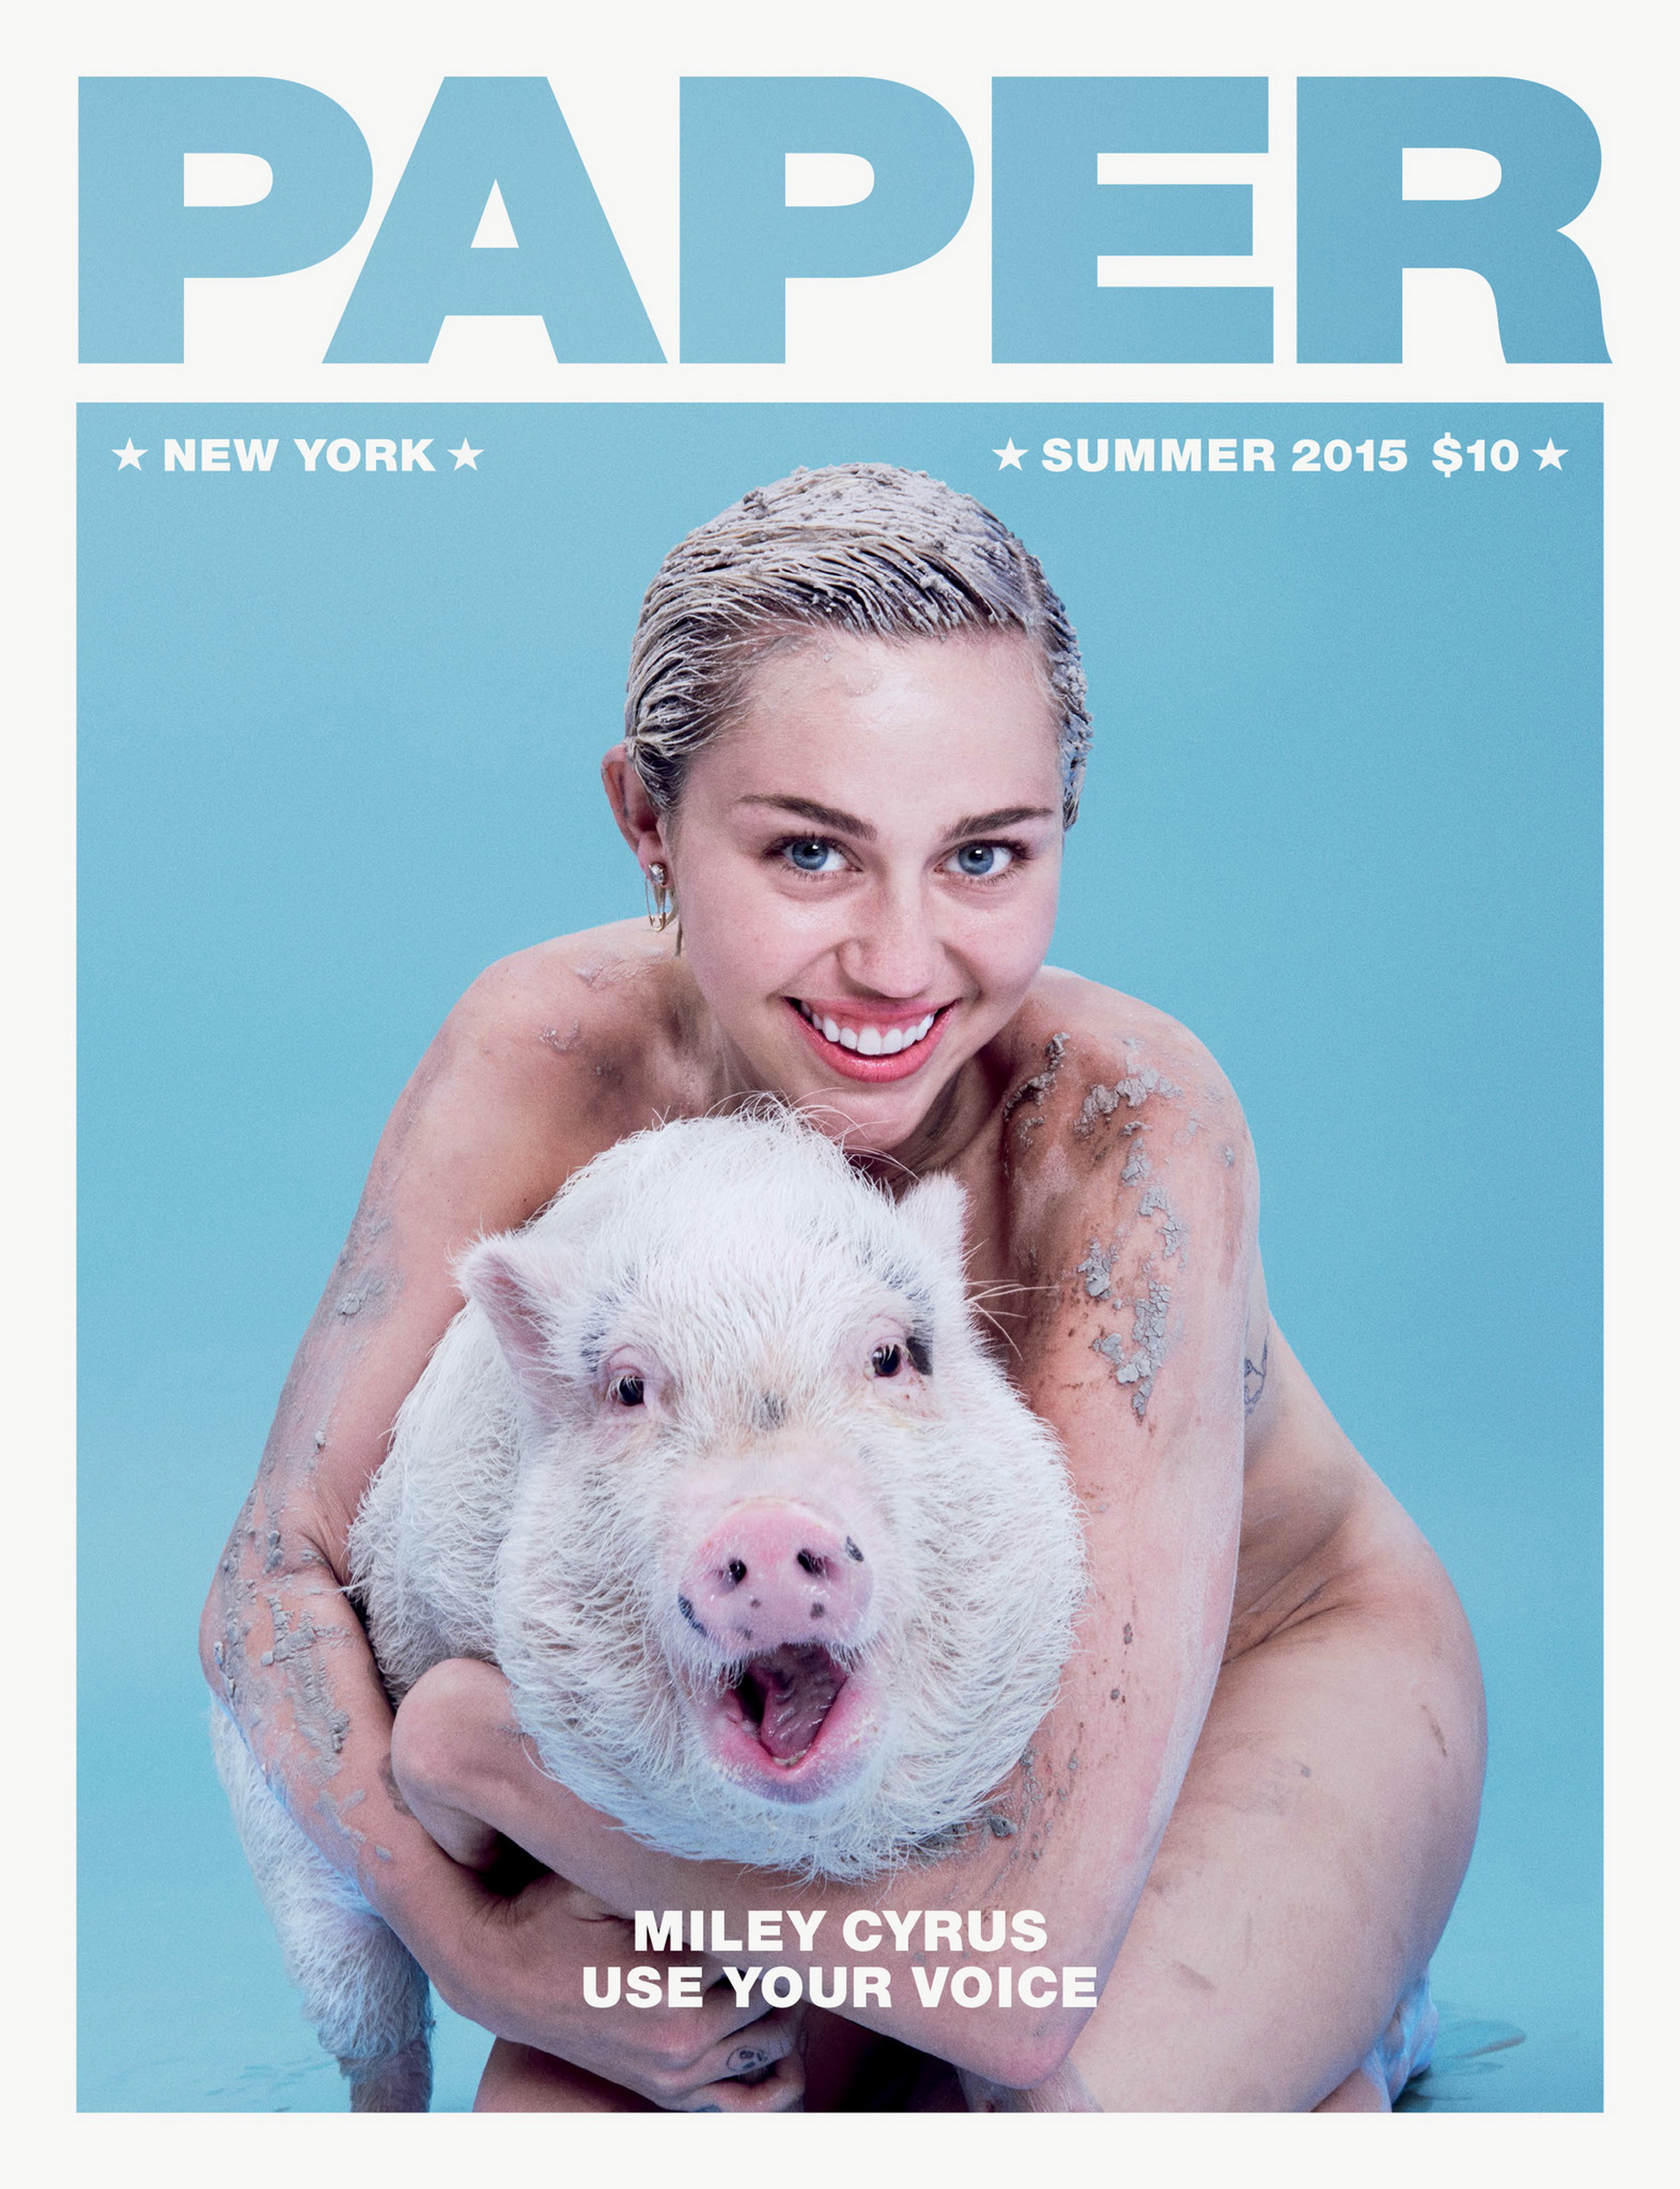 Miley Cyrus nude for Paper Magazine 2015 Summer issue 10x HQ 4.jpg